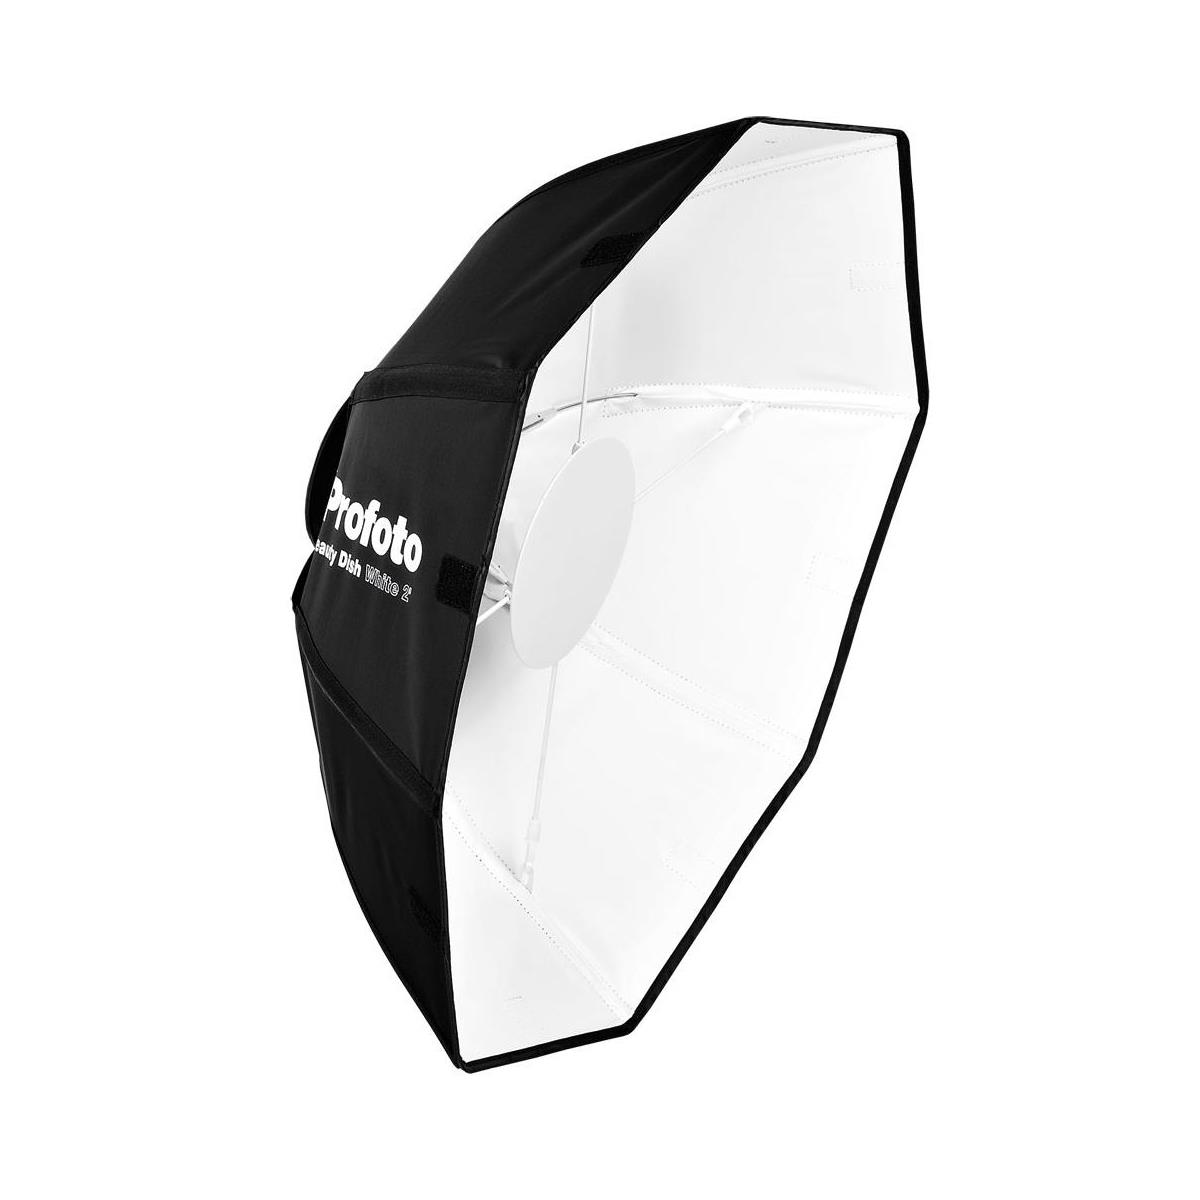 Photos - Softbox Profoto OCF 24" Beauty Dish with Deflector Plate, White 101220 